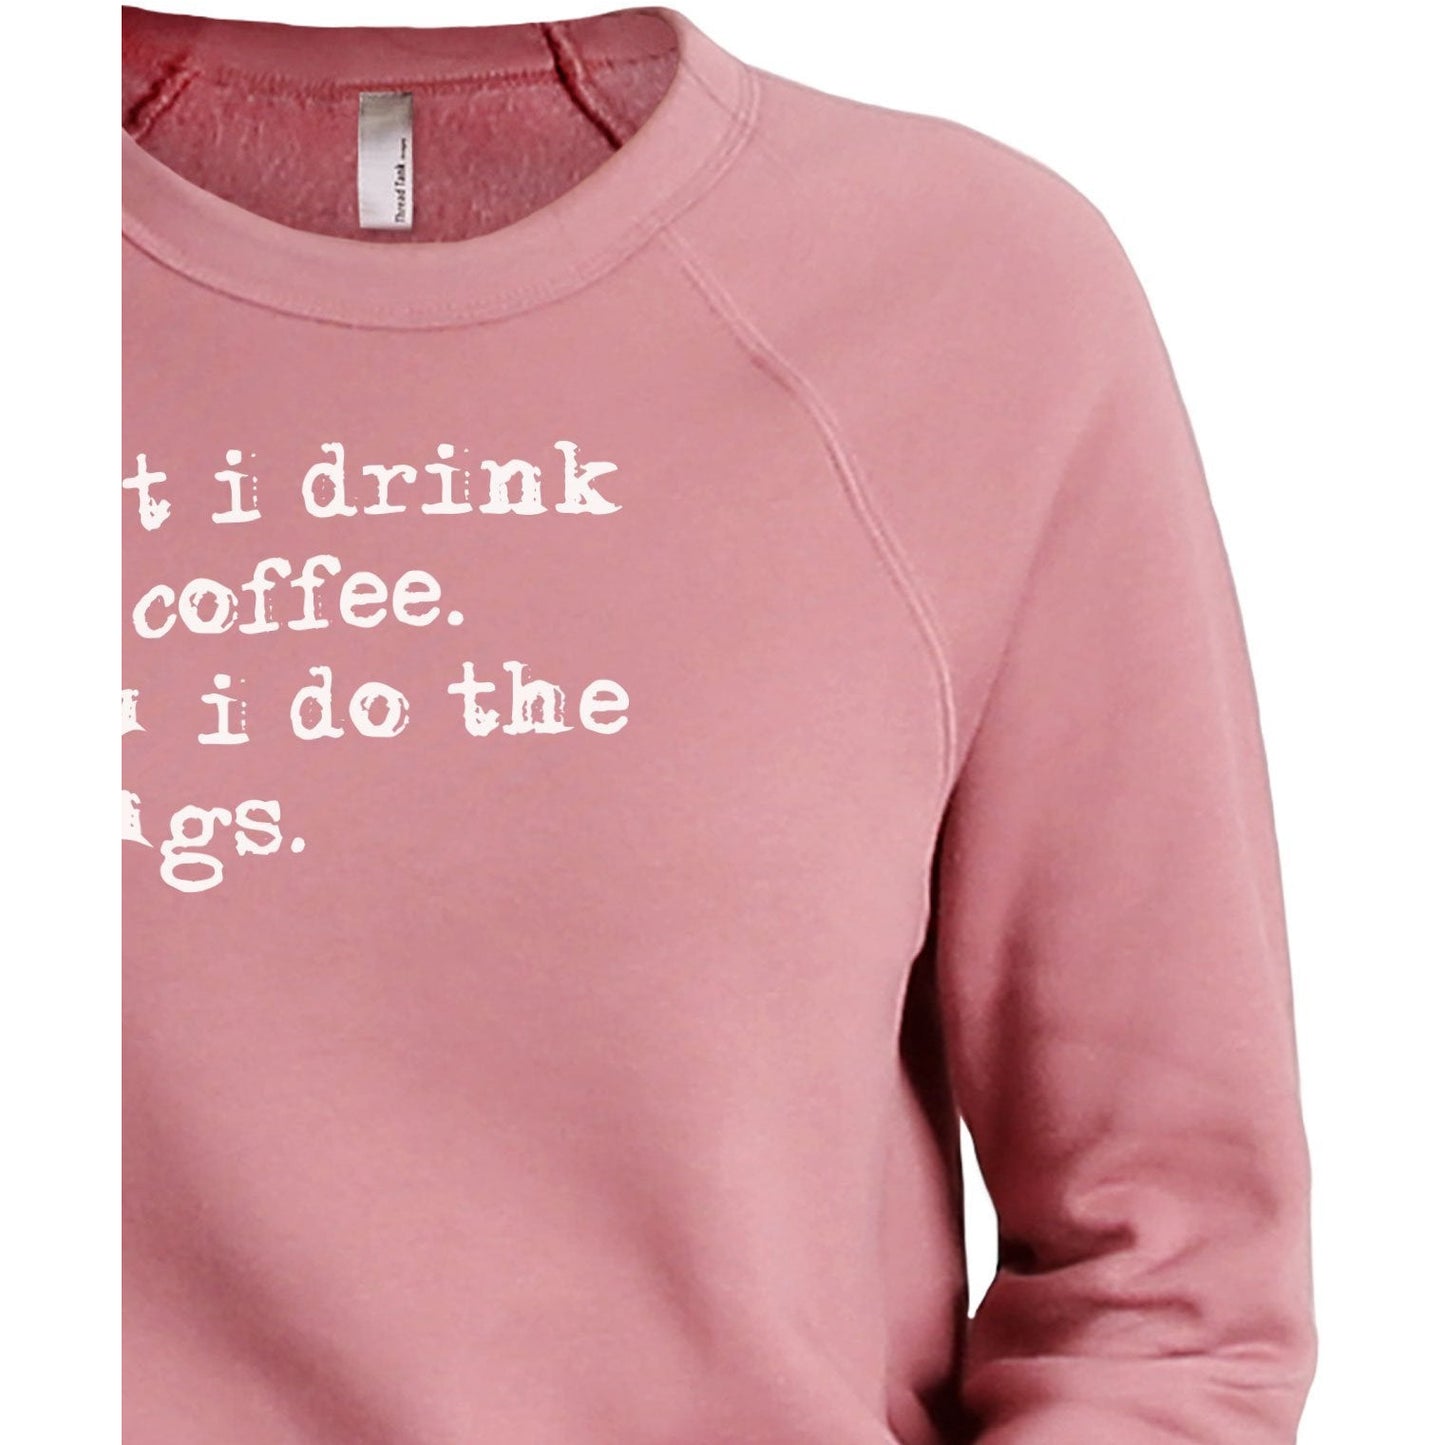 First I Drink The Coffee Then I Do The Things Women's Cozy Fleece Longsleeves Sweater Rouge Closeup Details